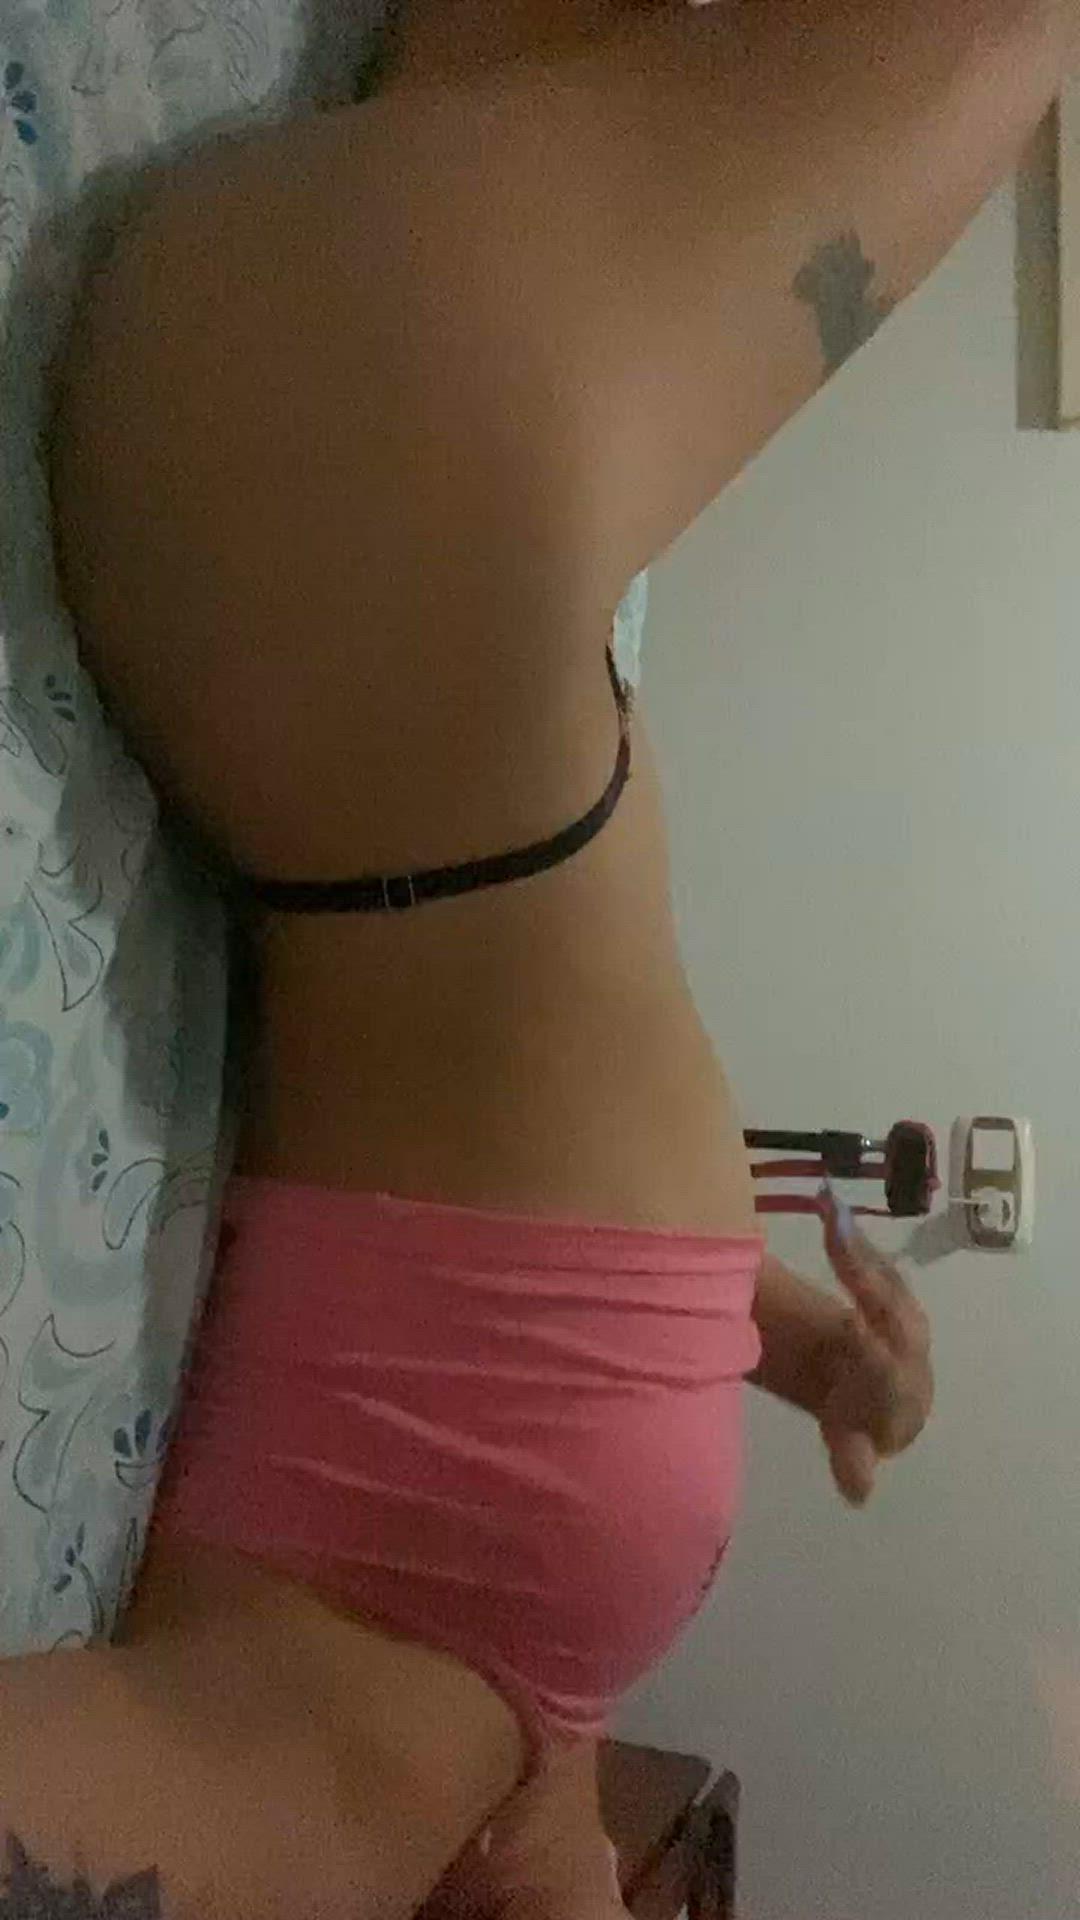 Ass porn video with onlyfans model agusfranze <strong>@onlyagusfranze</strong>